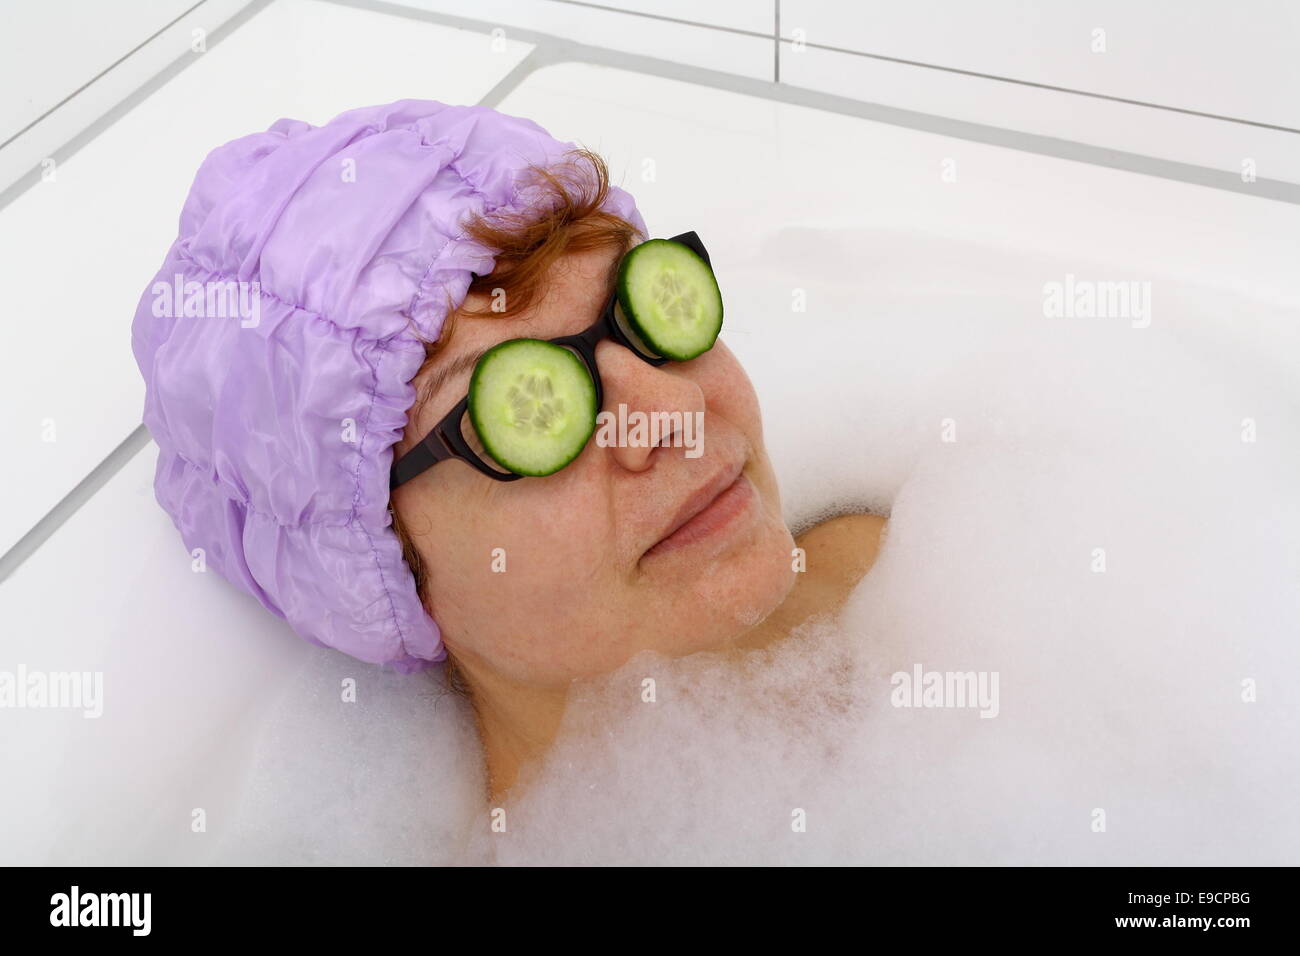 Mature woman in bathtub with cucumber slices on the spectacle, Procedure Stock Photo